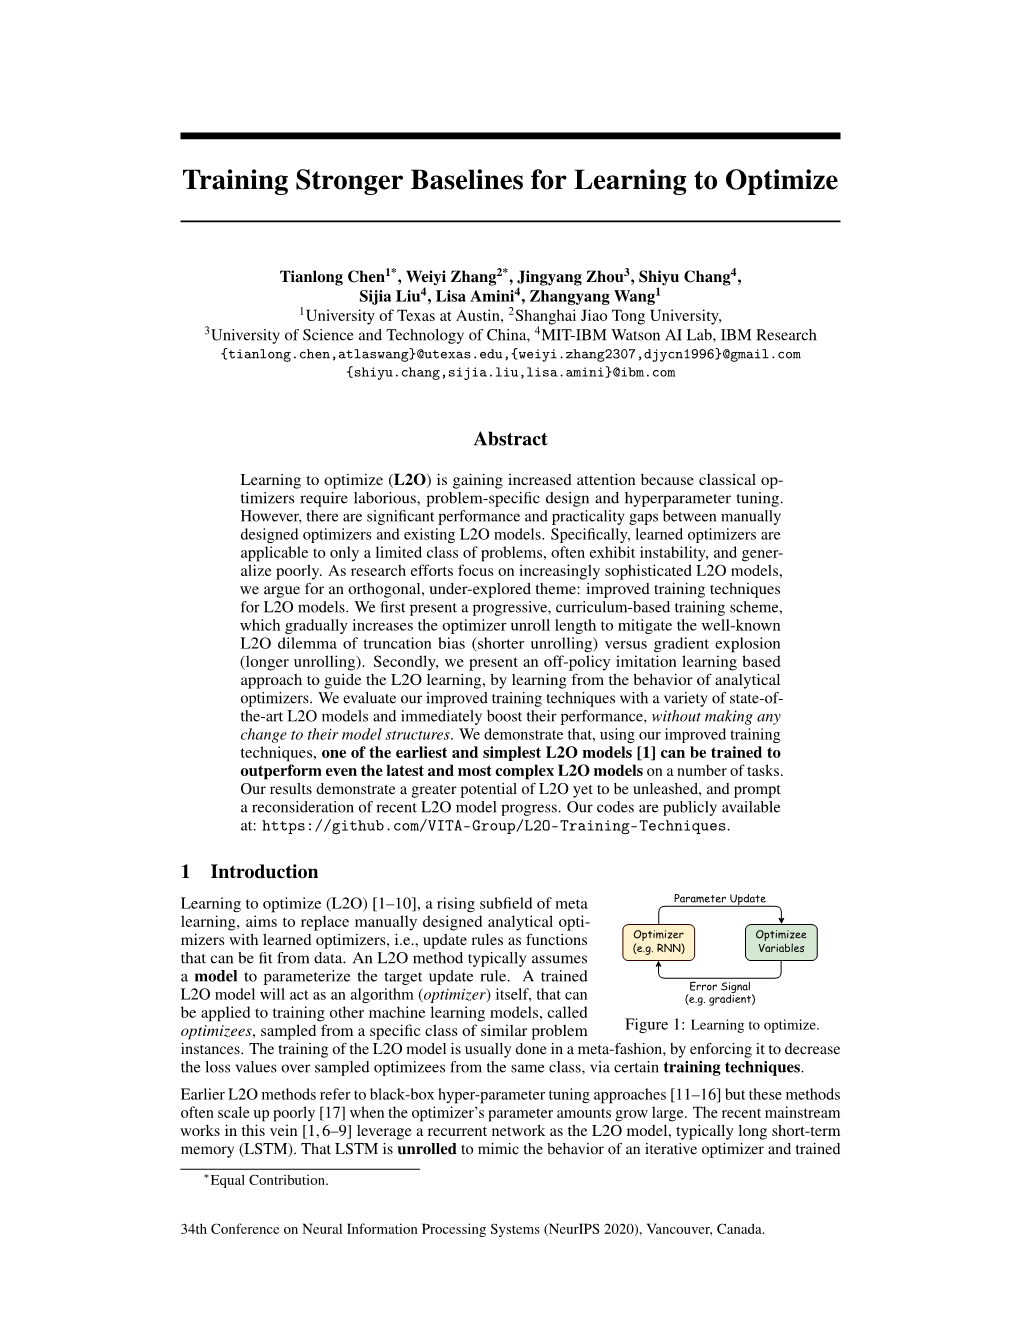 Training Stronger Baselines for Learning to Optimize